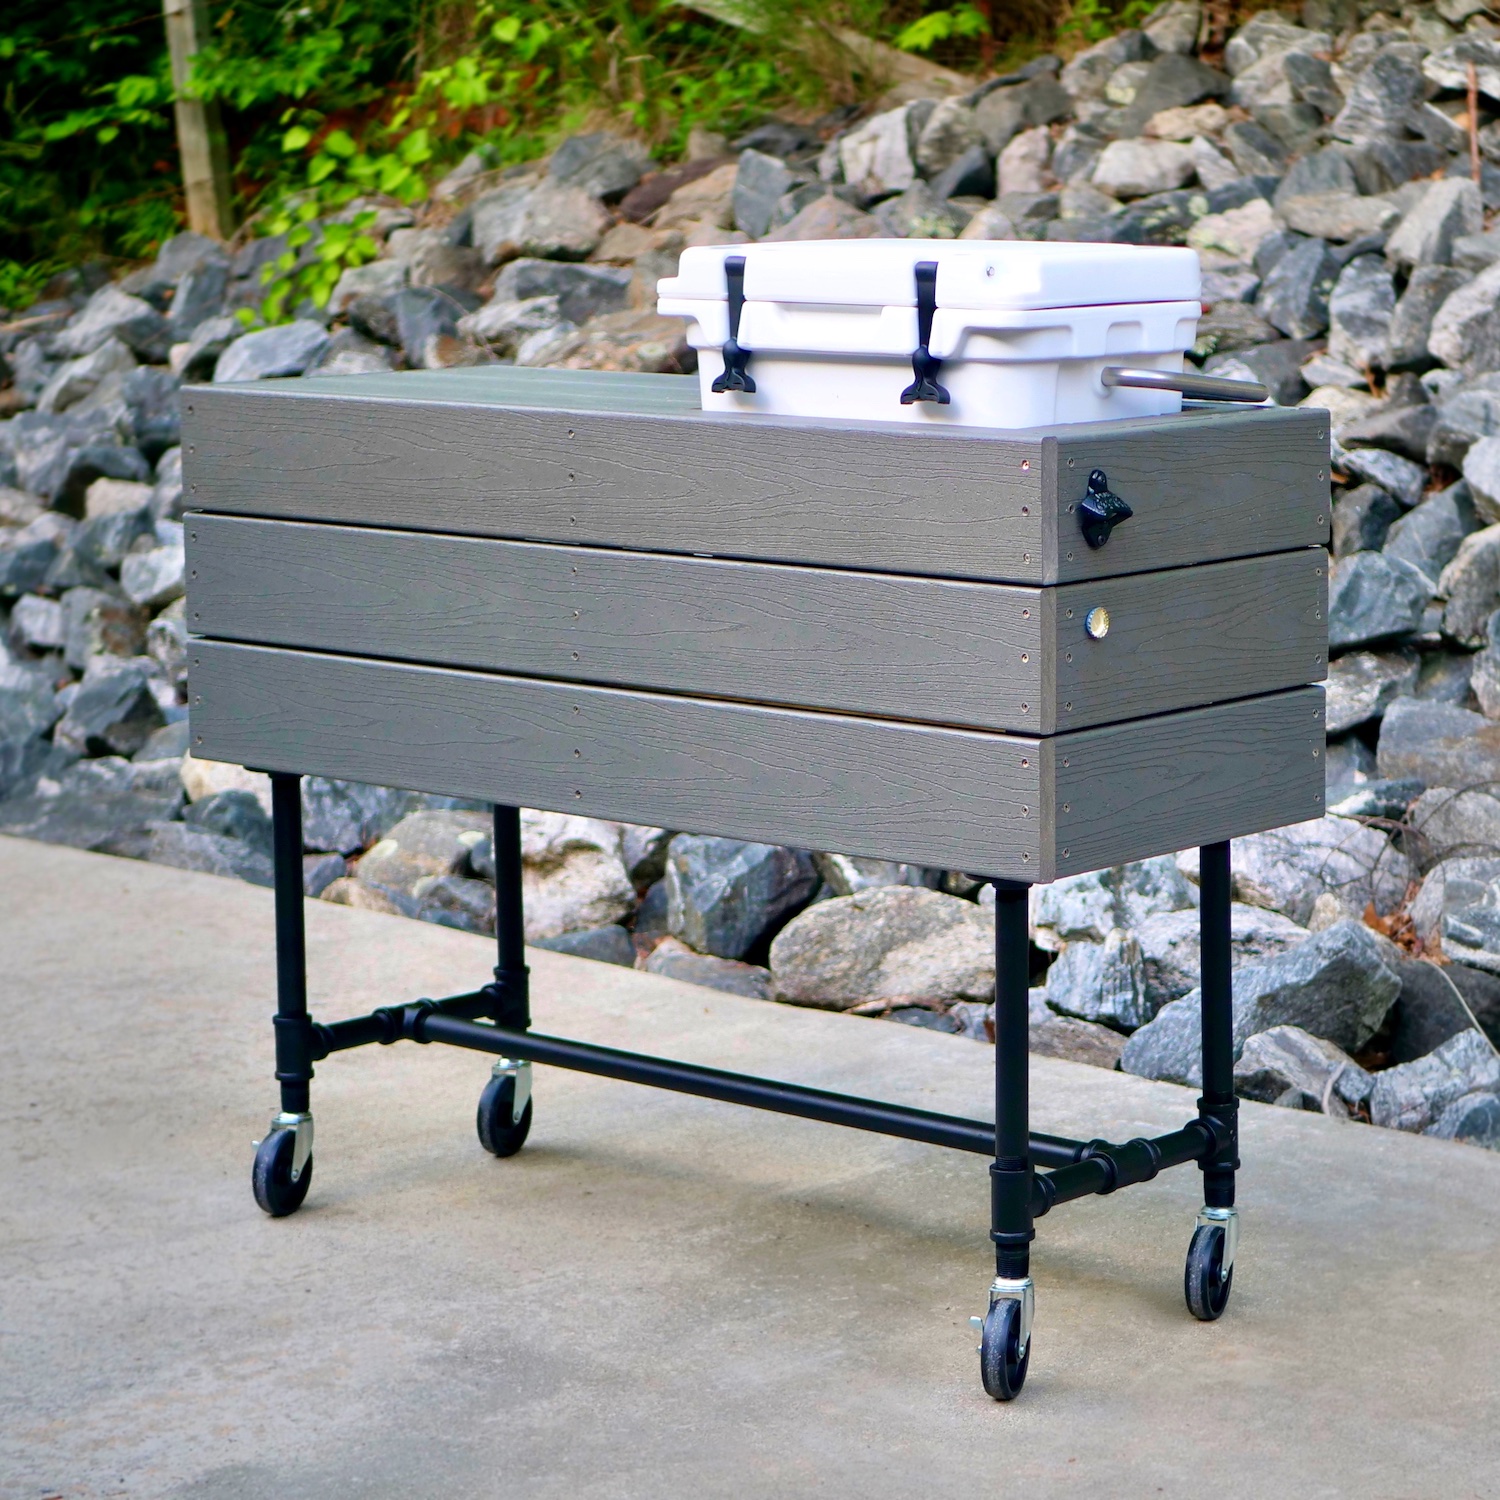 DIY Outdoor Patio Cooler Ice Chest Plans — Crafted Workshop